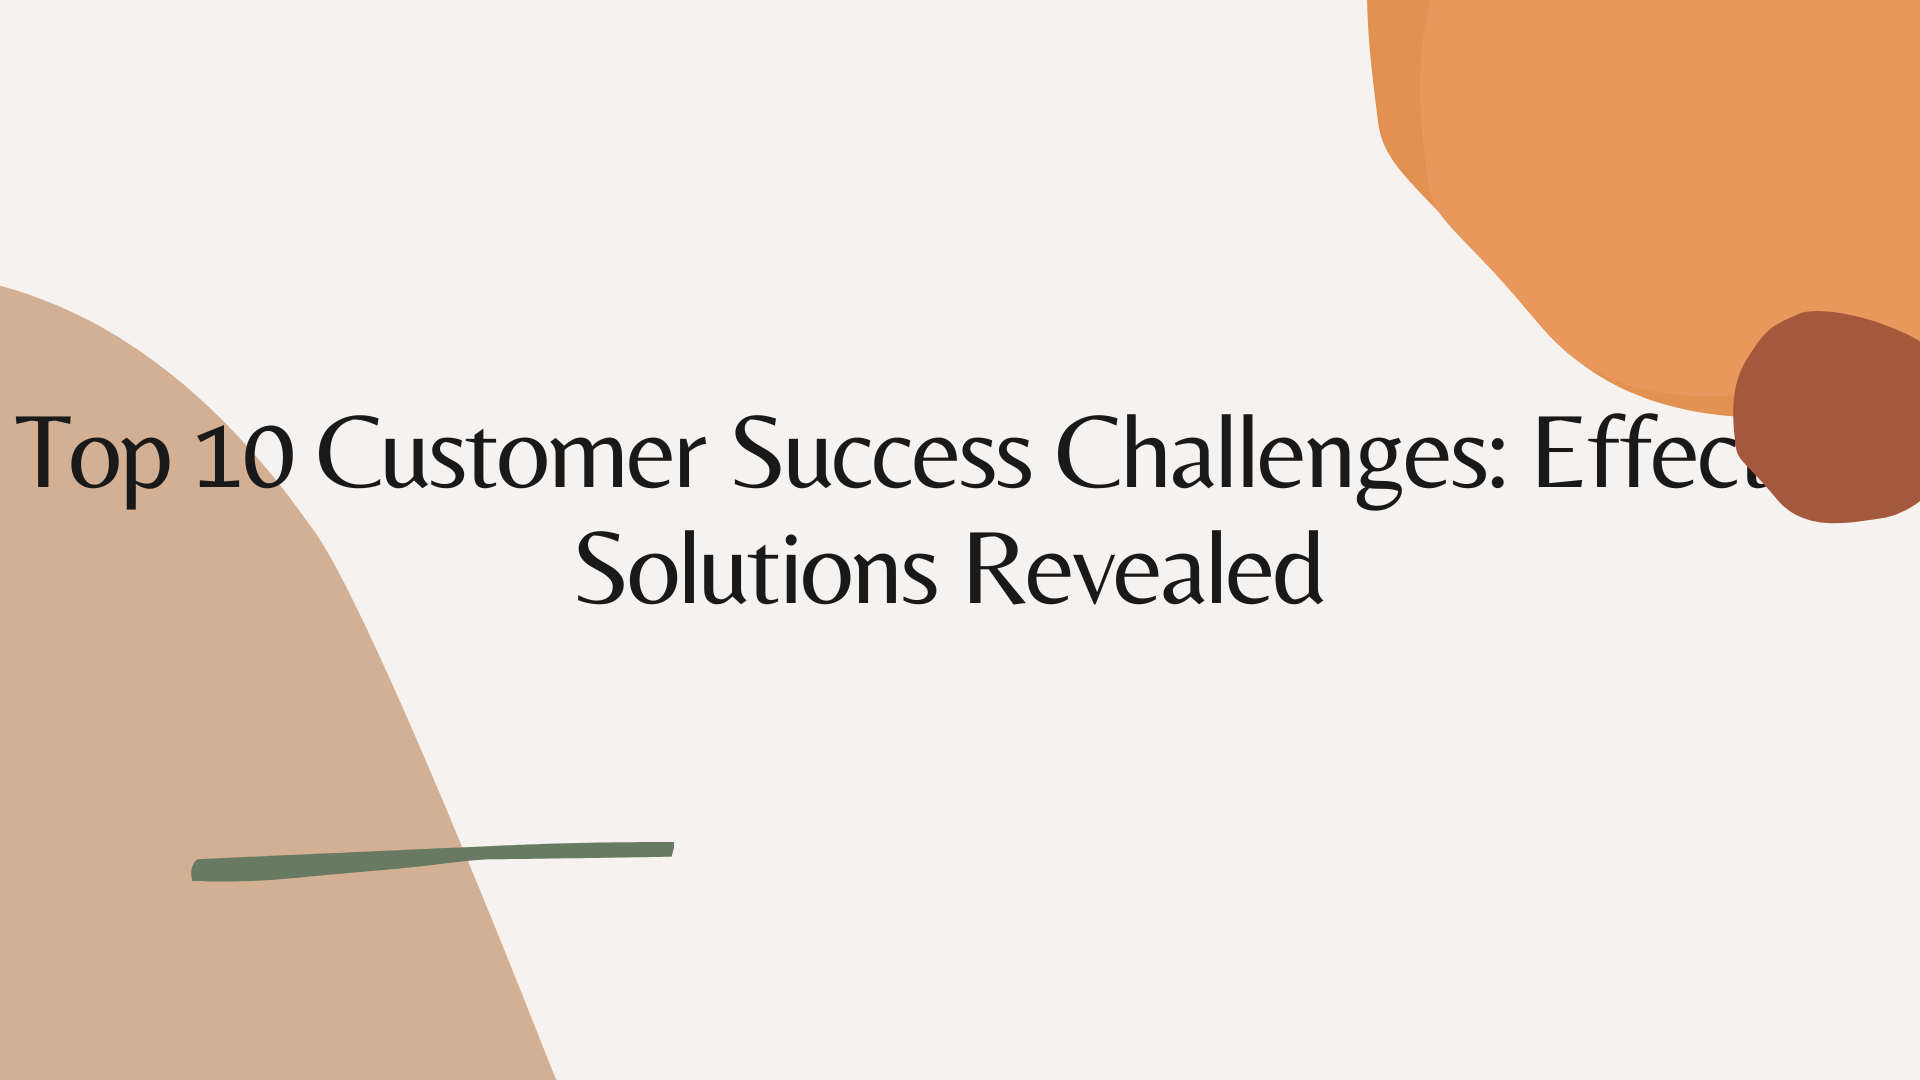 Top 10 Customer Success Challenges: Effective Solutions Revealed